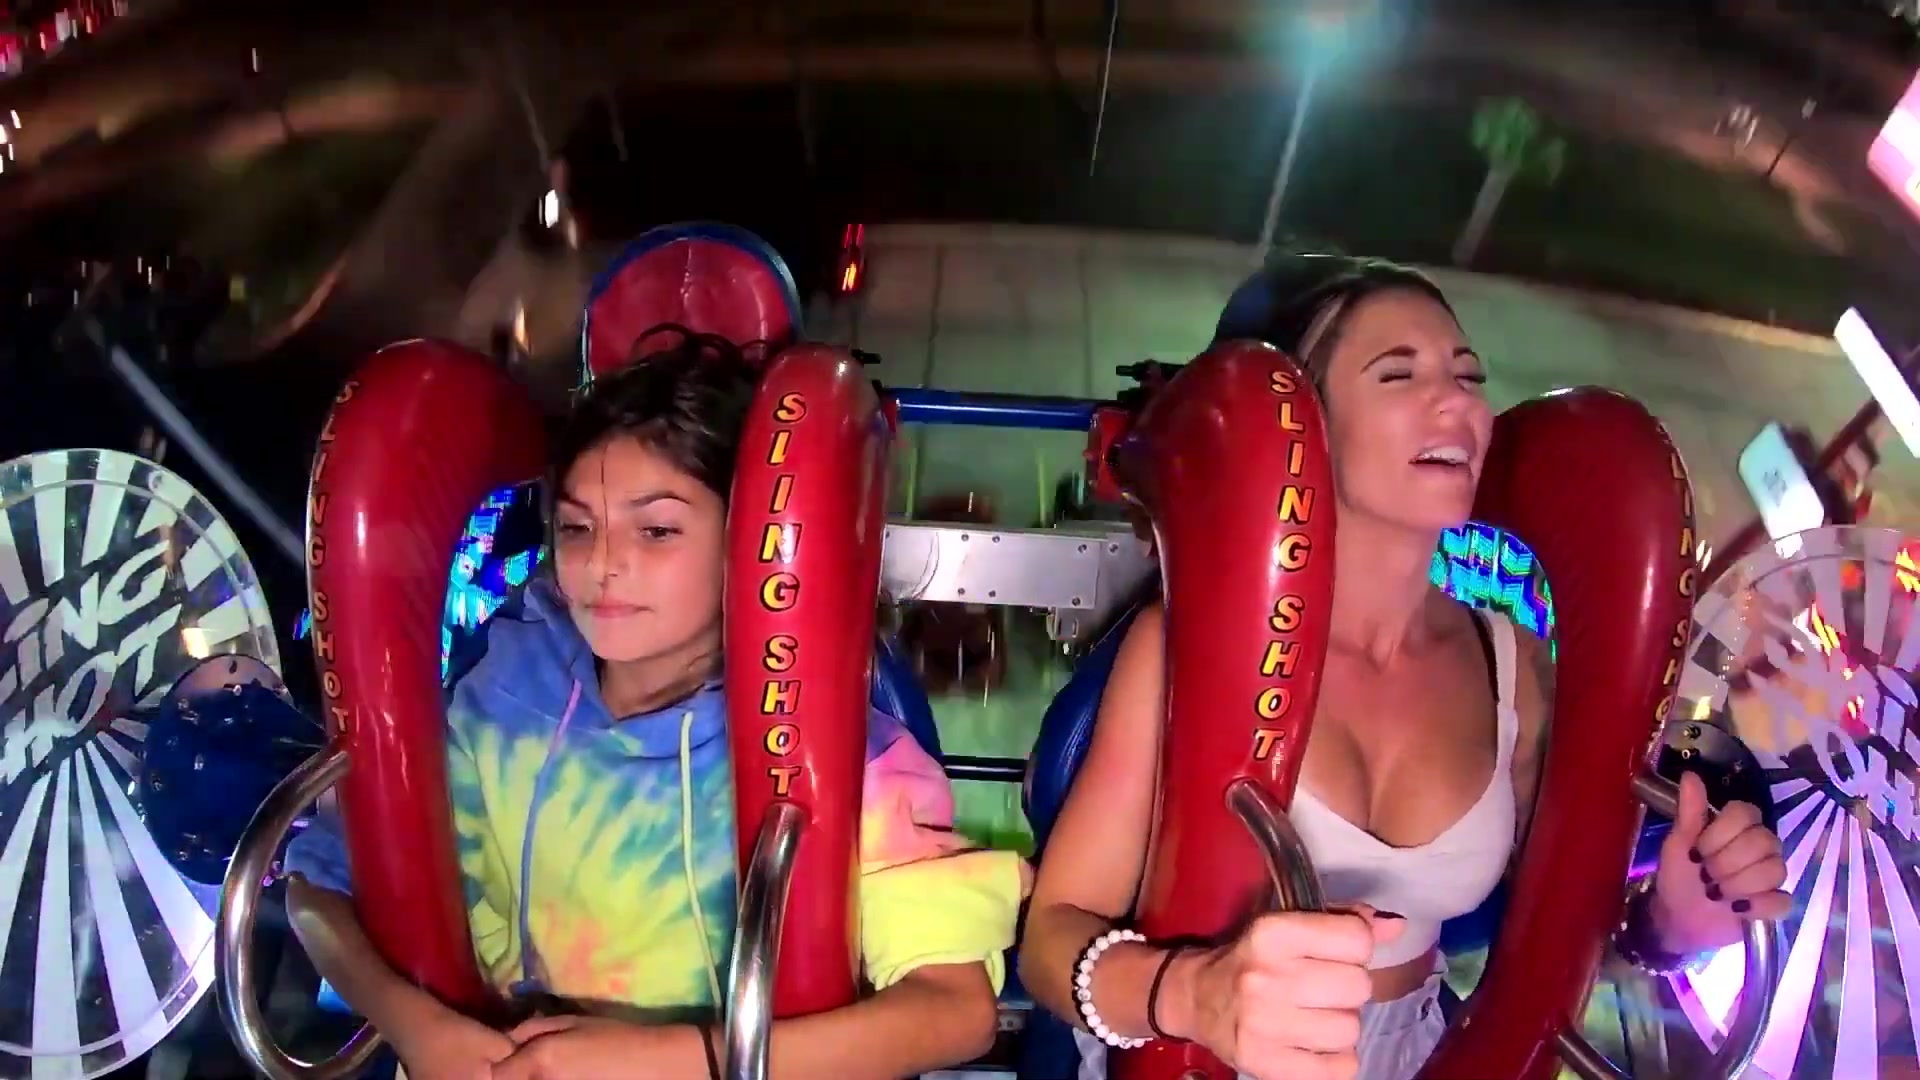 Bare-boobed fun: the best of the sling shot ride